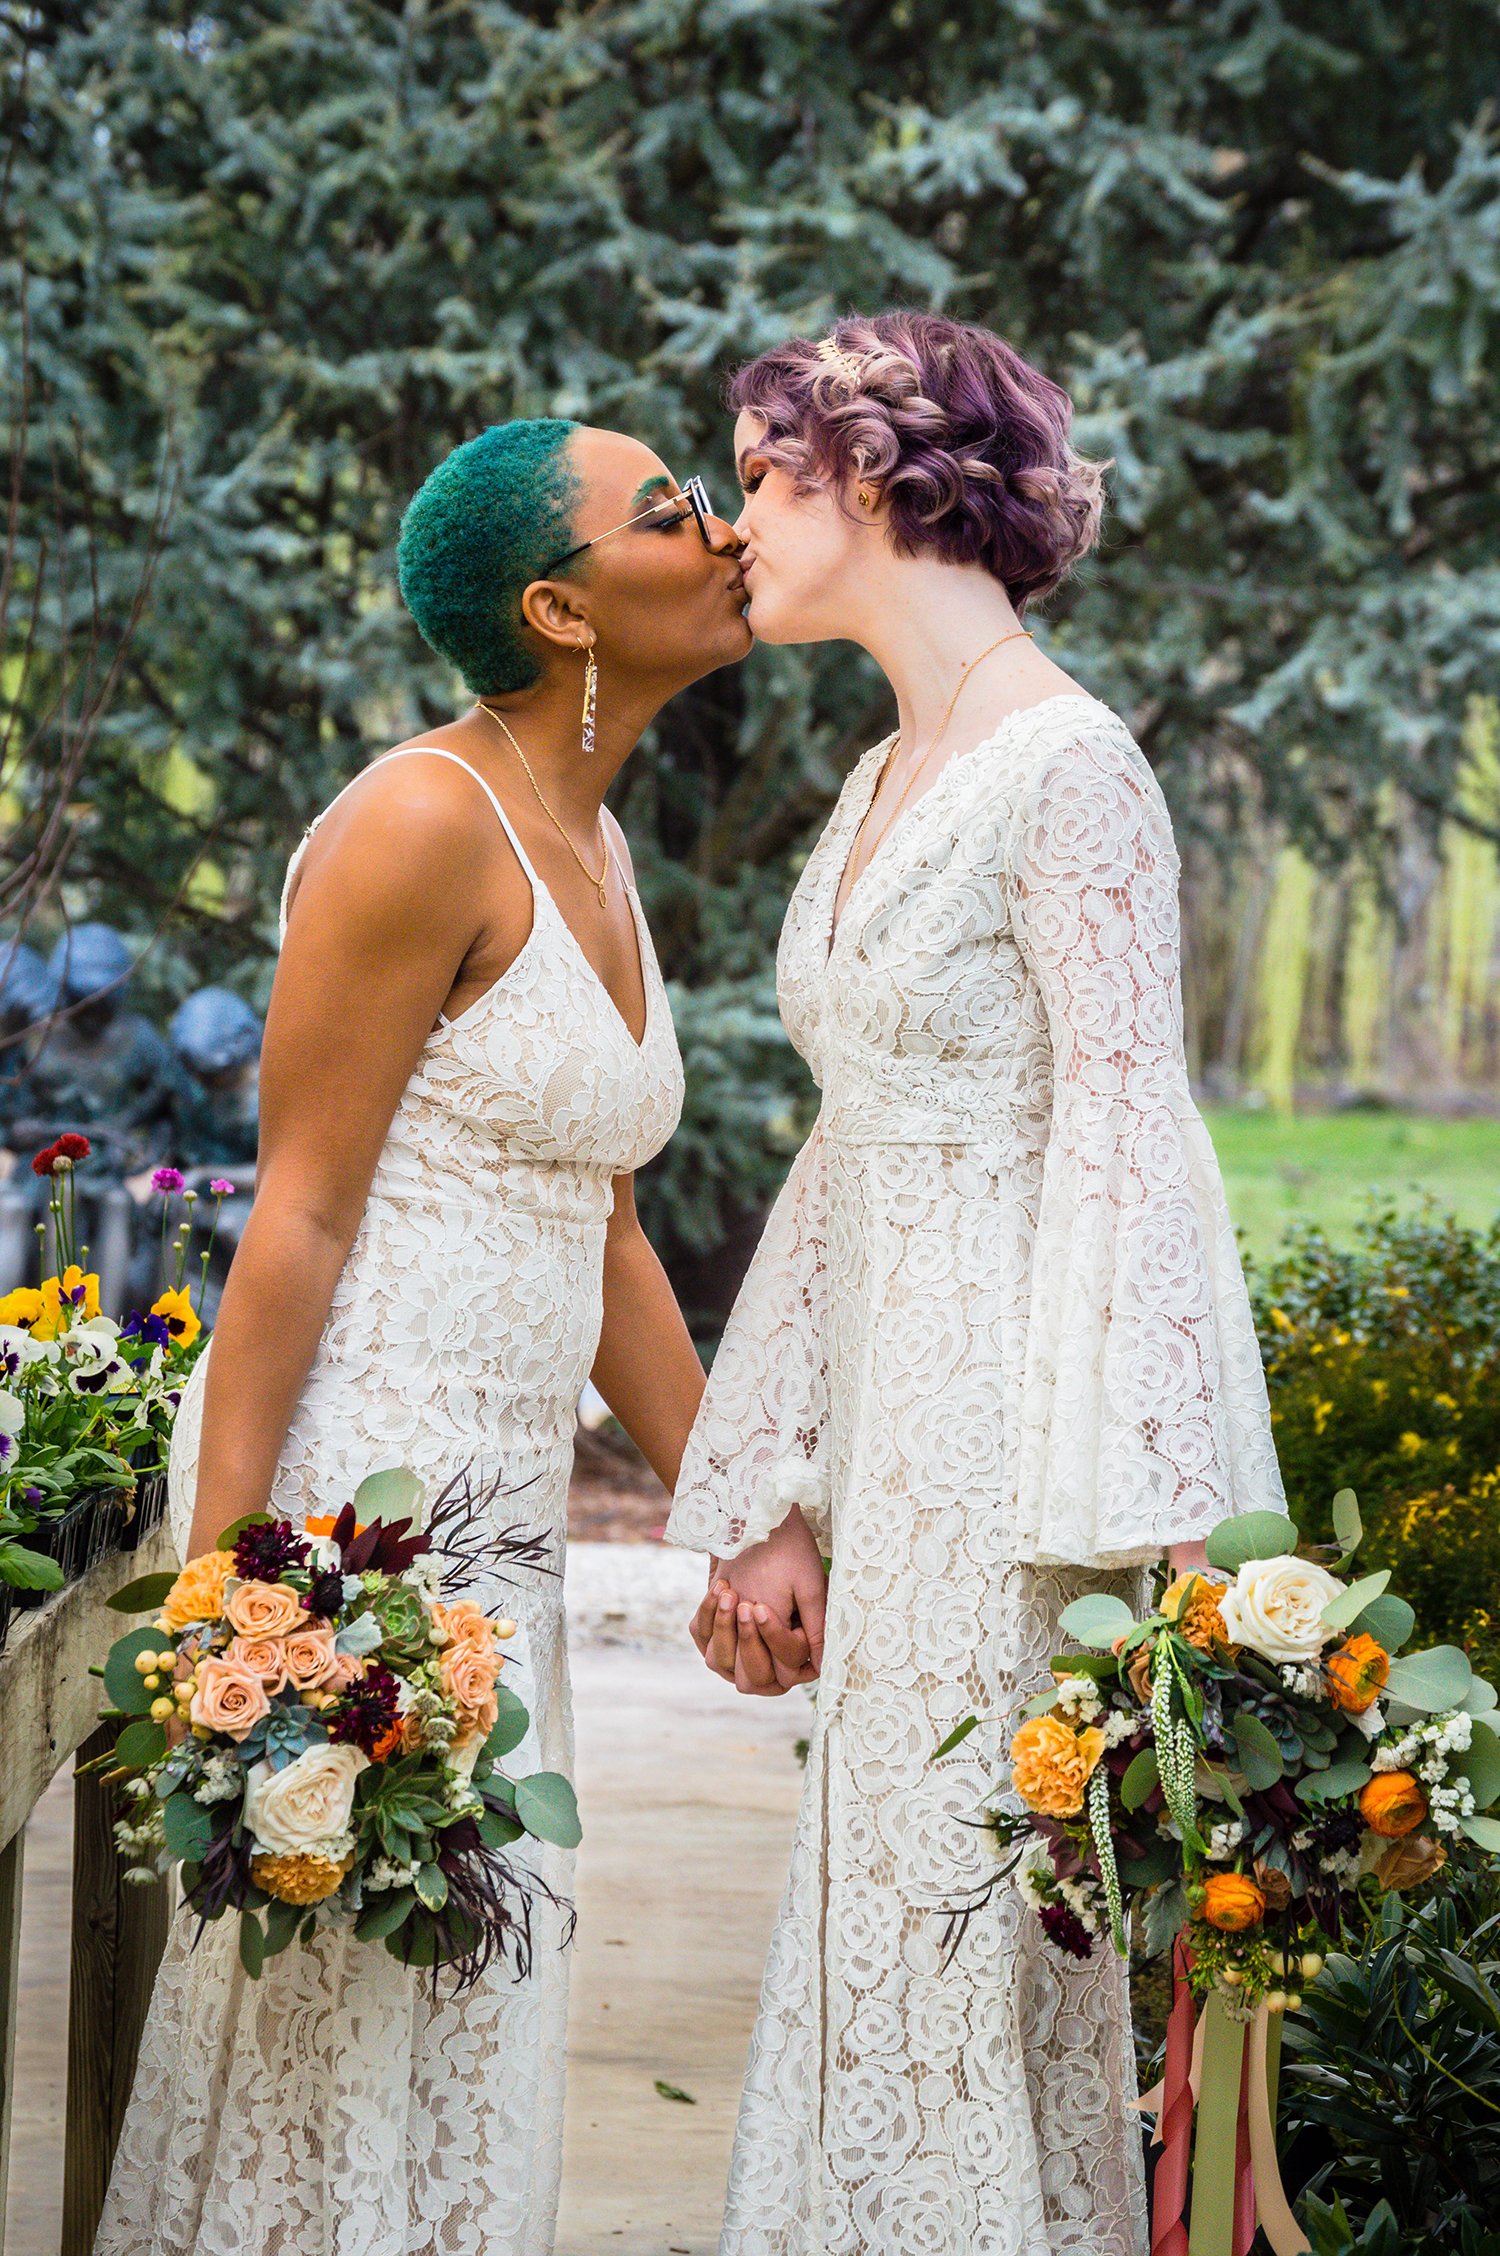 Model wedding partners kiss at a greenhouse elopement styled photoshoot in Virginia.